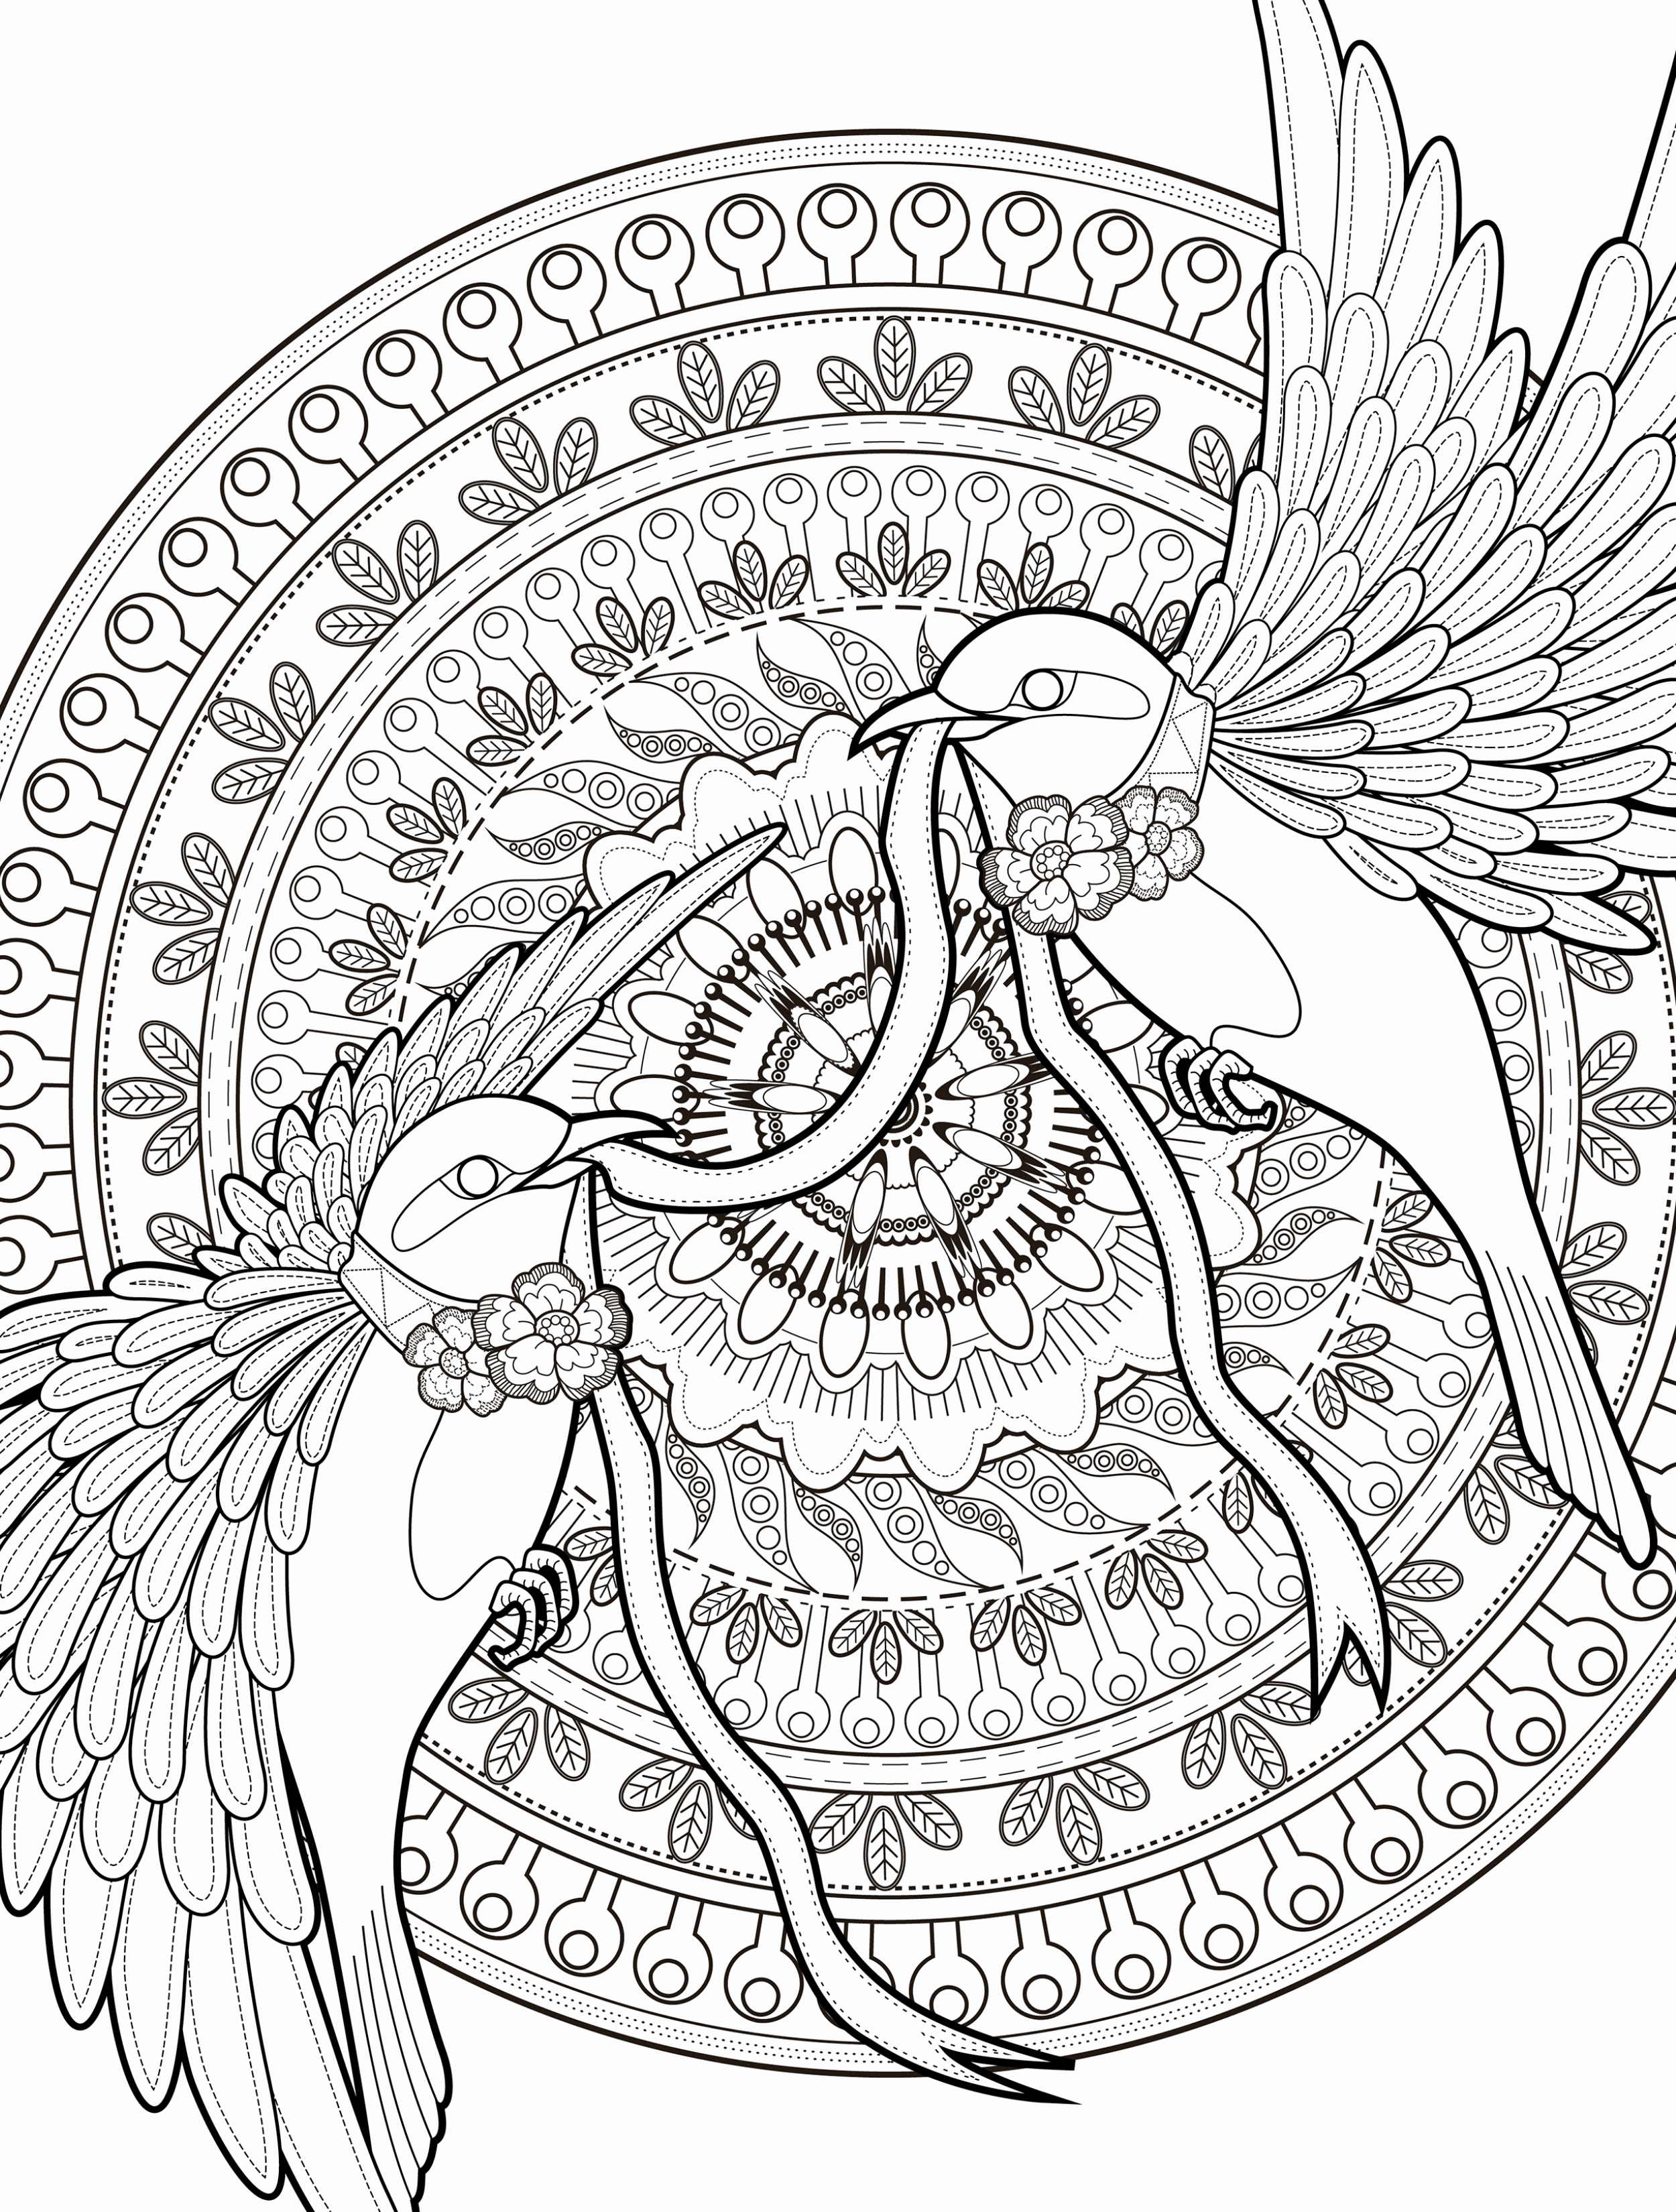 Free Adult Coloring Pages Pdf at GetDrawings | Free download